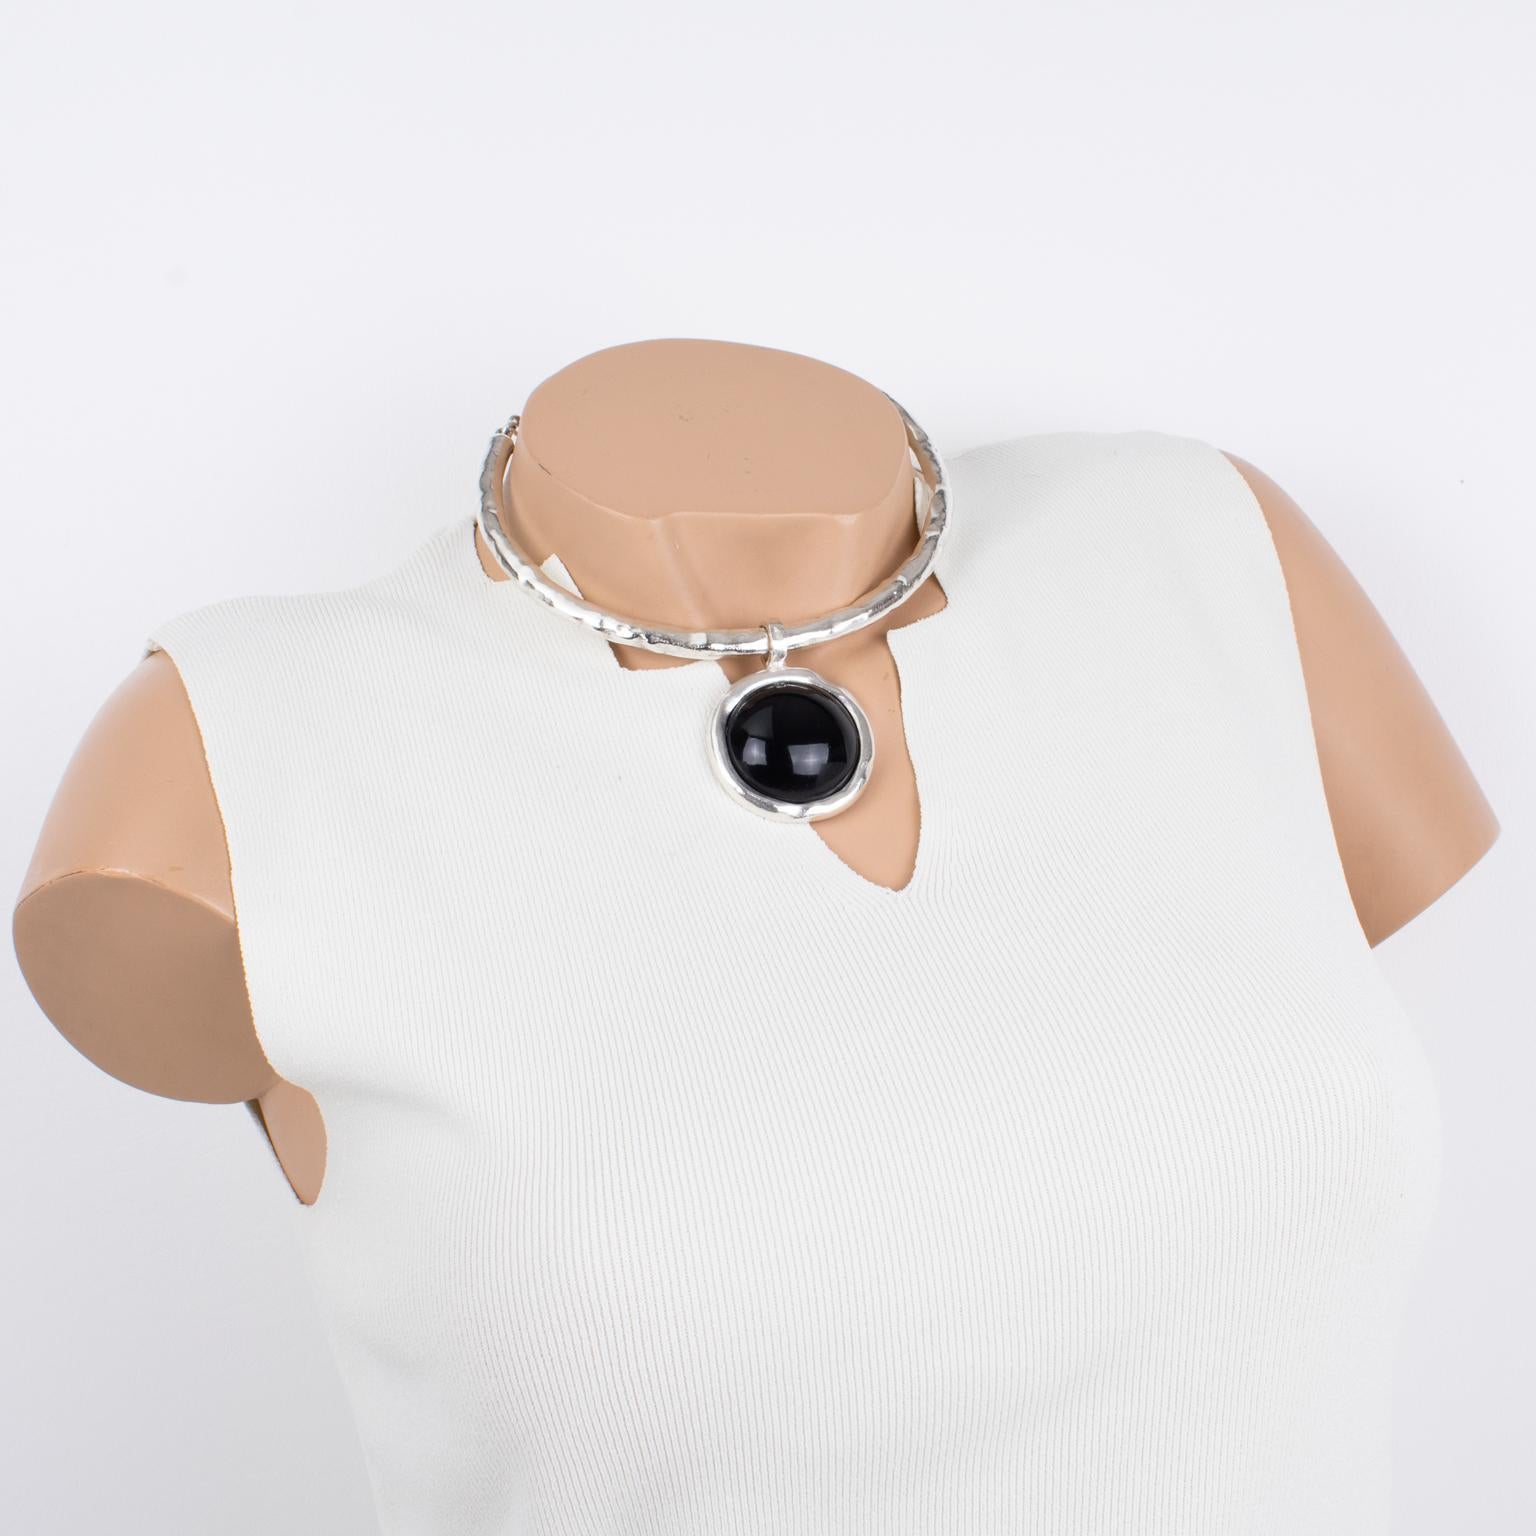 This elegant modernist silvered metal choker necklace by Nelly Biche de Bere, Paris, features a rigid around-the-neck band with a hand-made feel design complimented with a round pendant. The pendant is ornate with a massive black resin cabochon. The